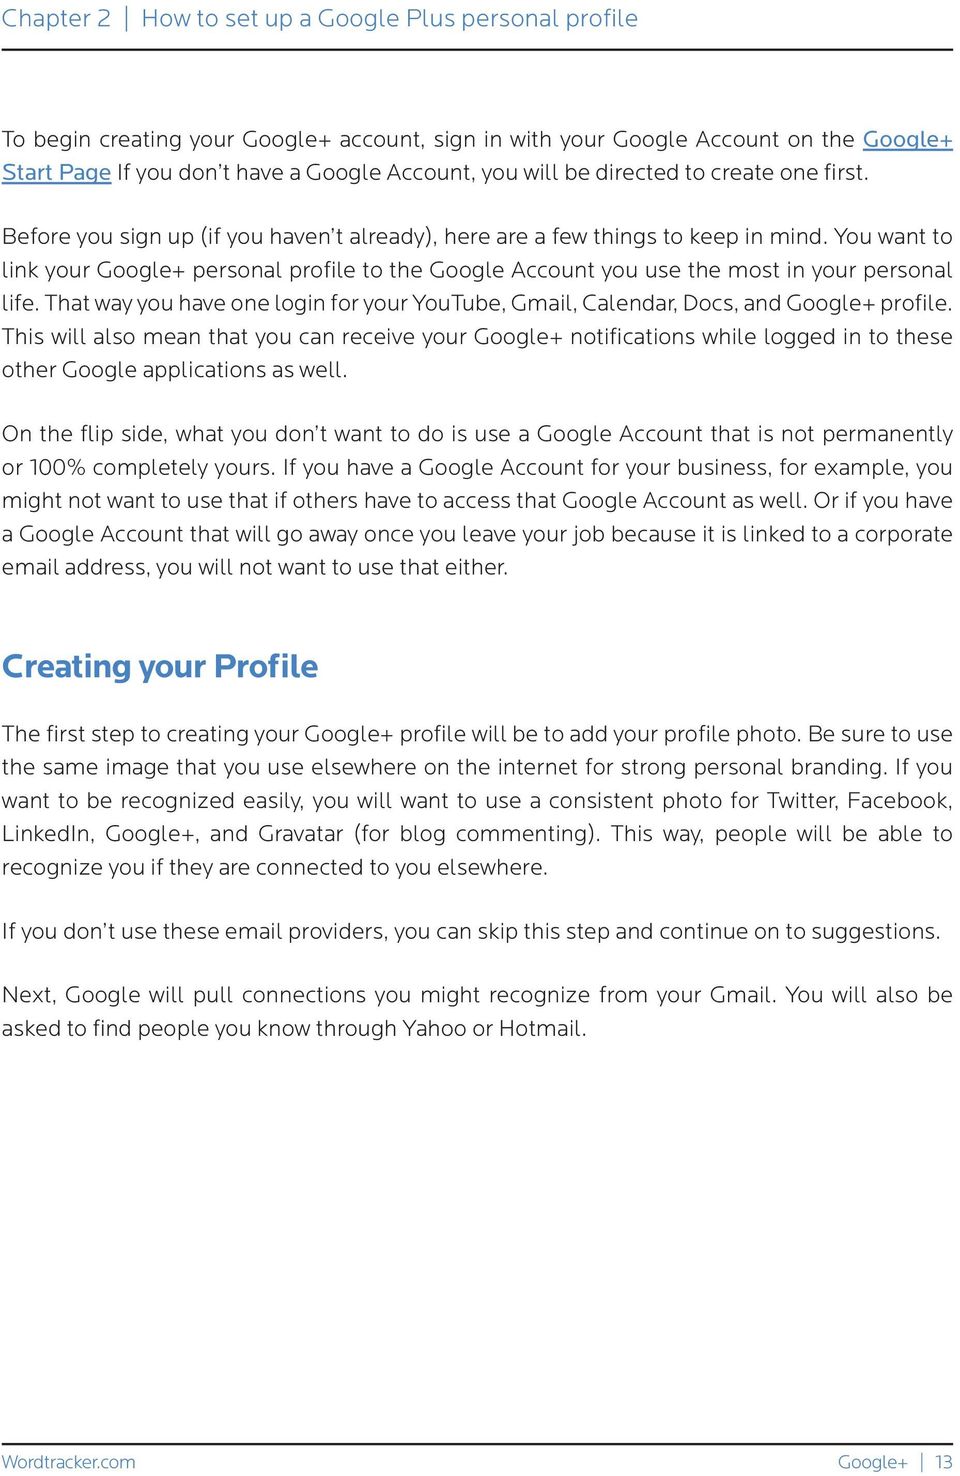 You want to link your Google+ personal profile to the Google Account you use the most in your personal life. That way you have one login for your YouTube, Gmail, Calendar, Docs, and Google+ profile.